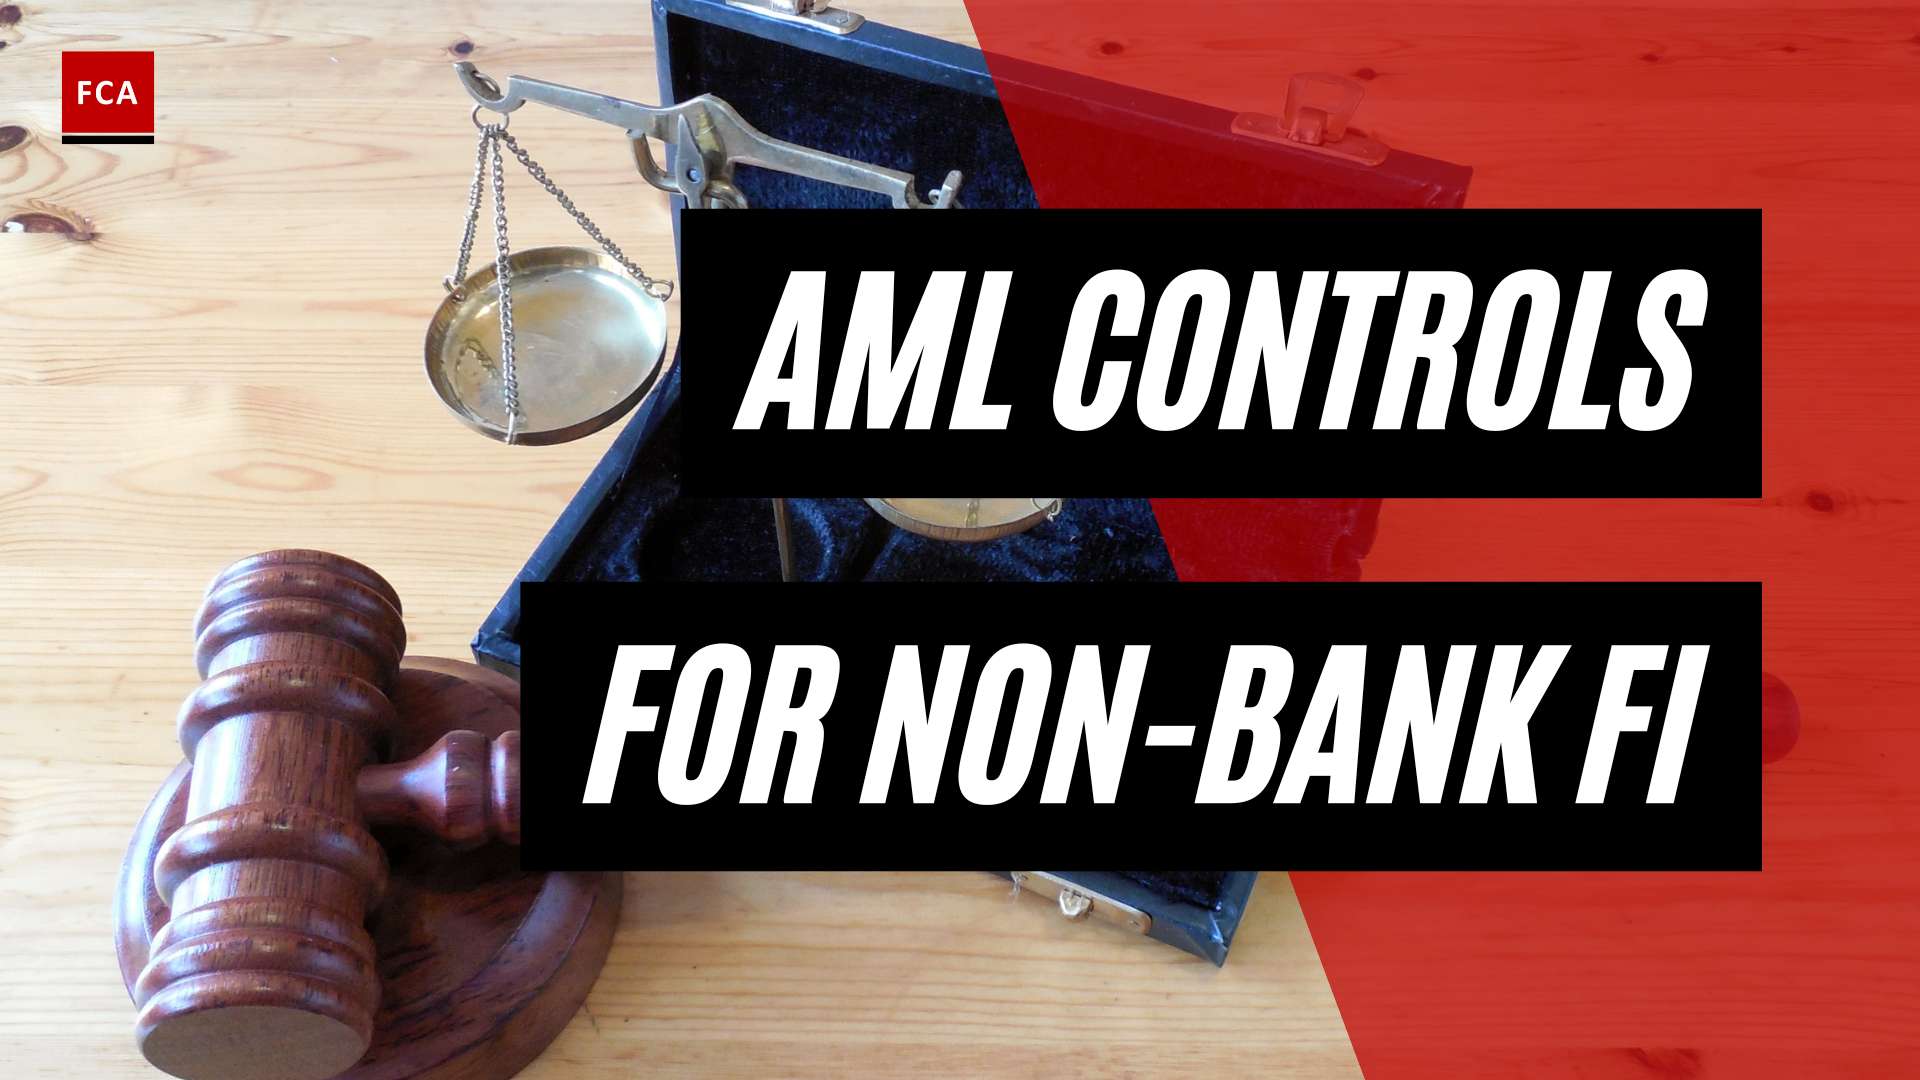 Mastering Compliance: Effective Aml Controls For Non-Bank Financial Institutions